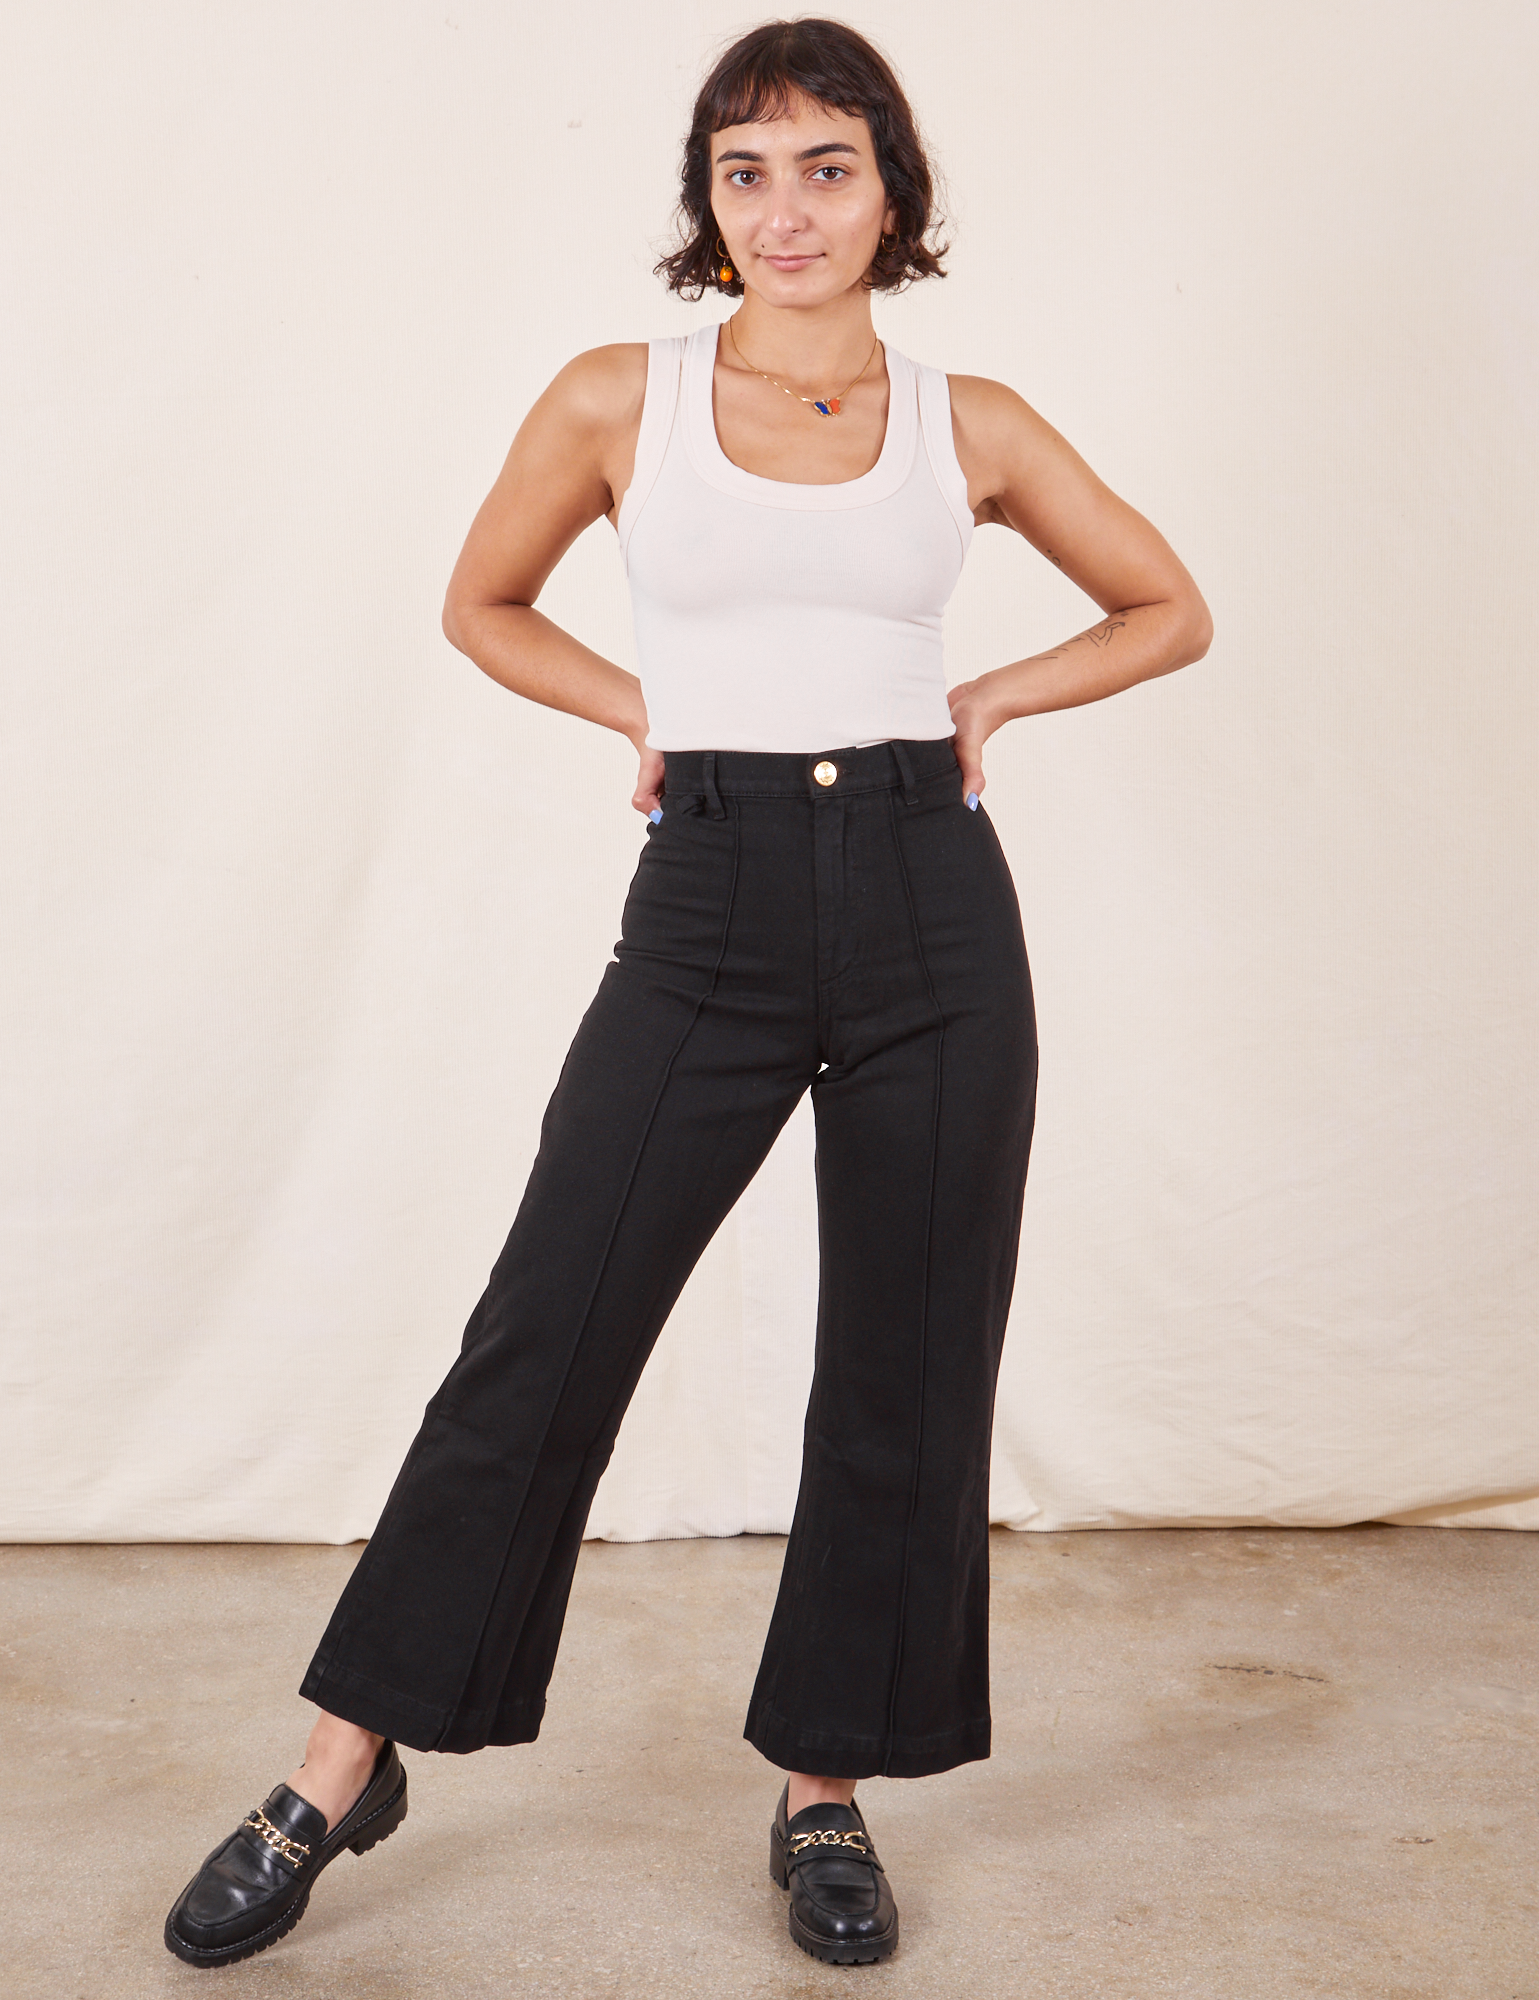 Soraya is 5&#39;2&quot; and wearing XXS Petite Western Pants in Basic Black paired with a Tank Top in vintage tee off-white